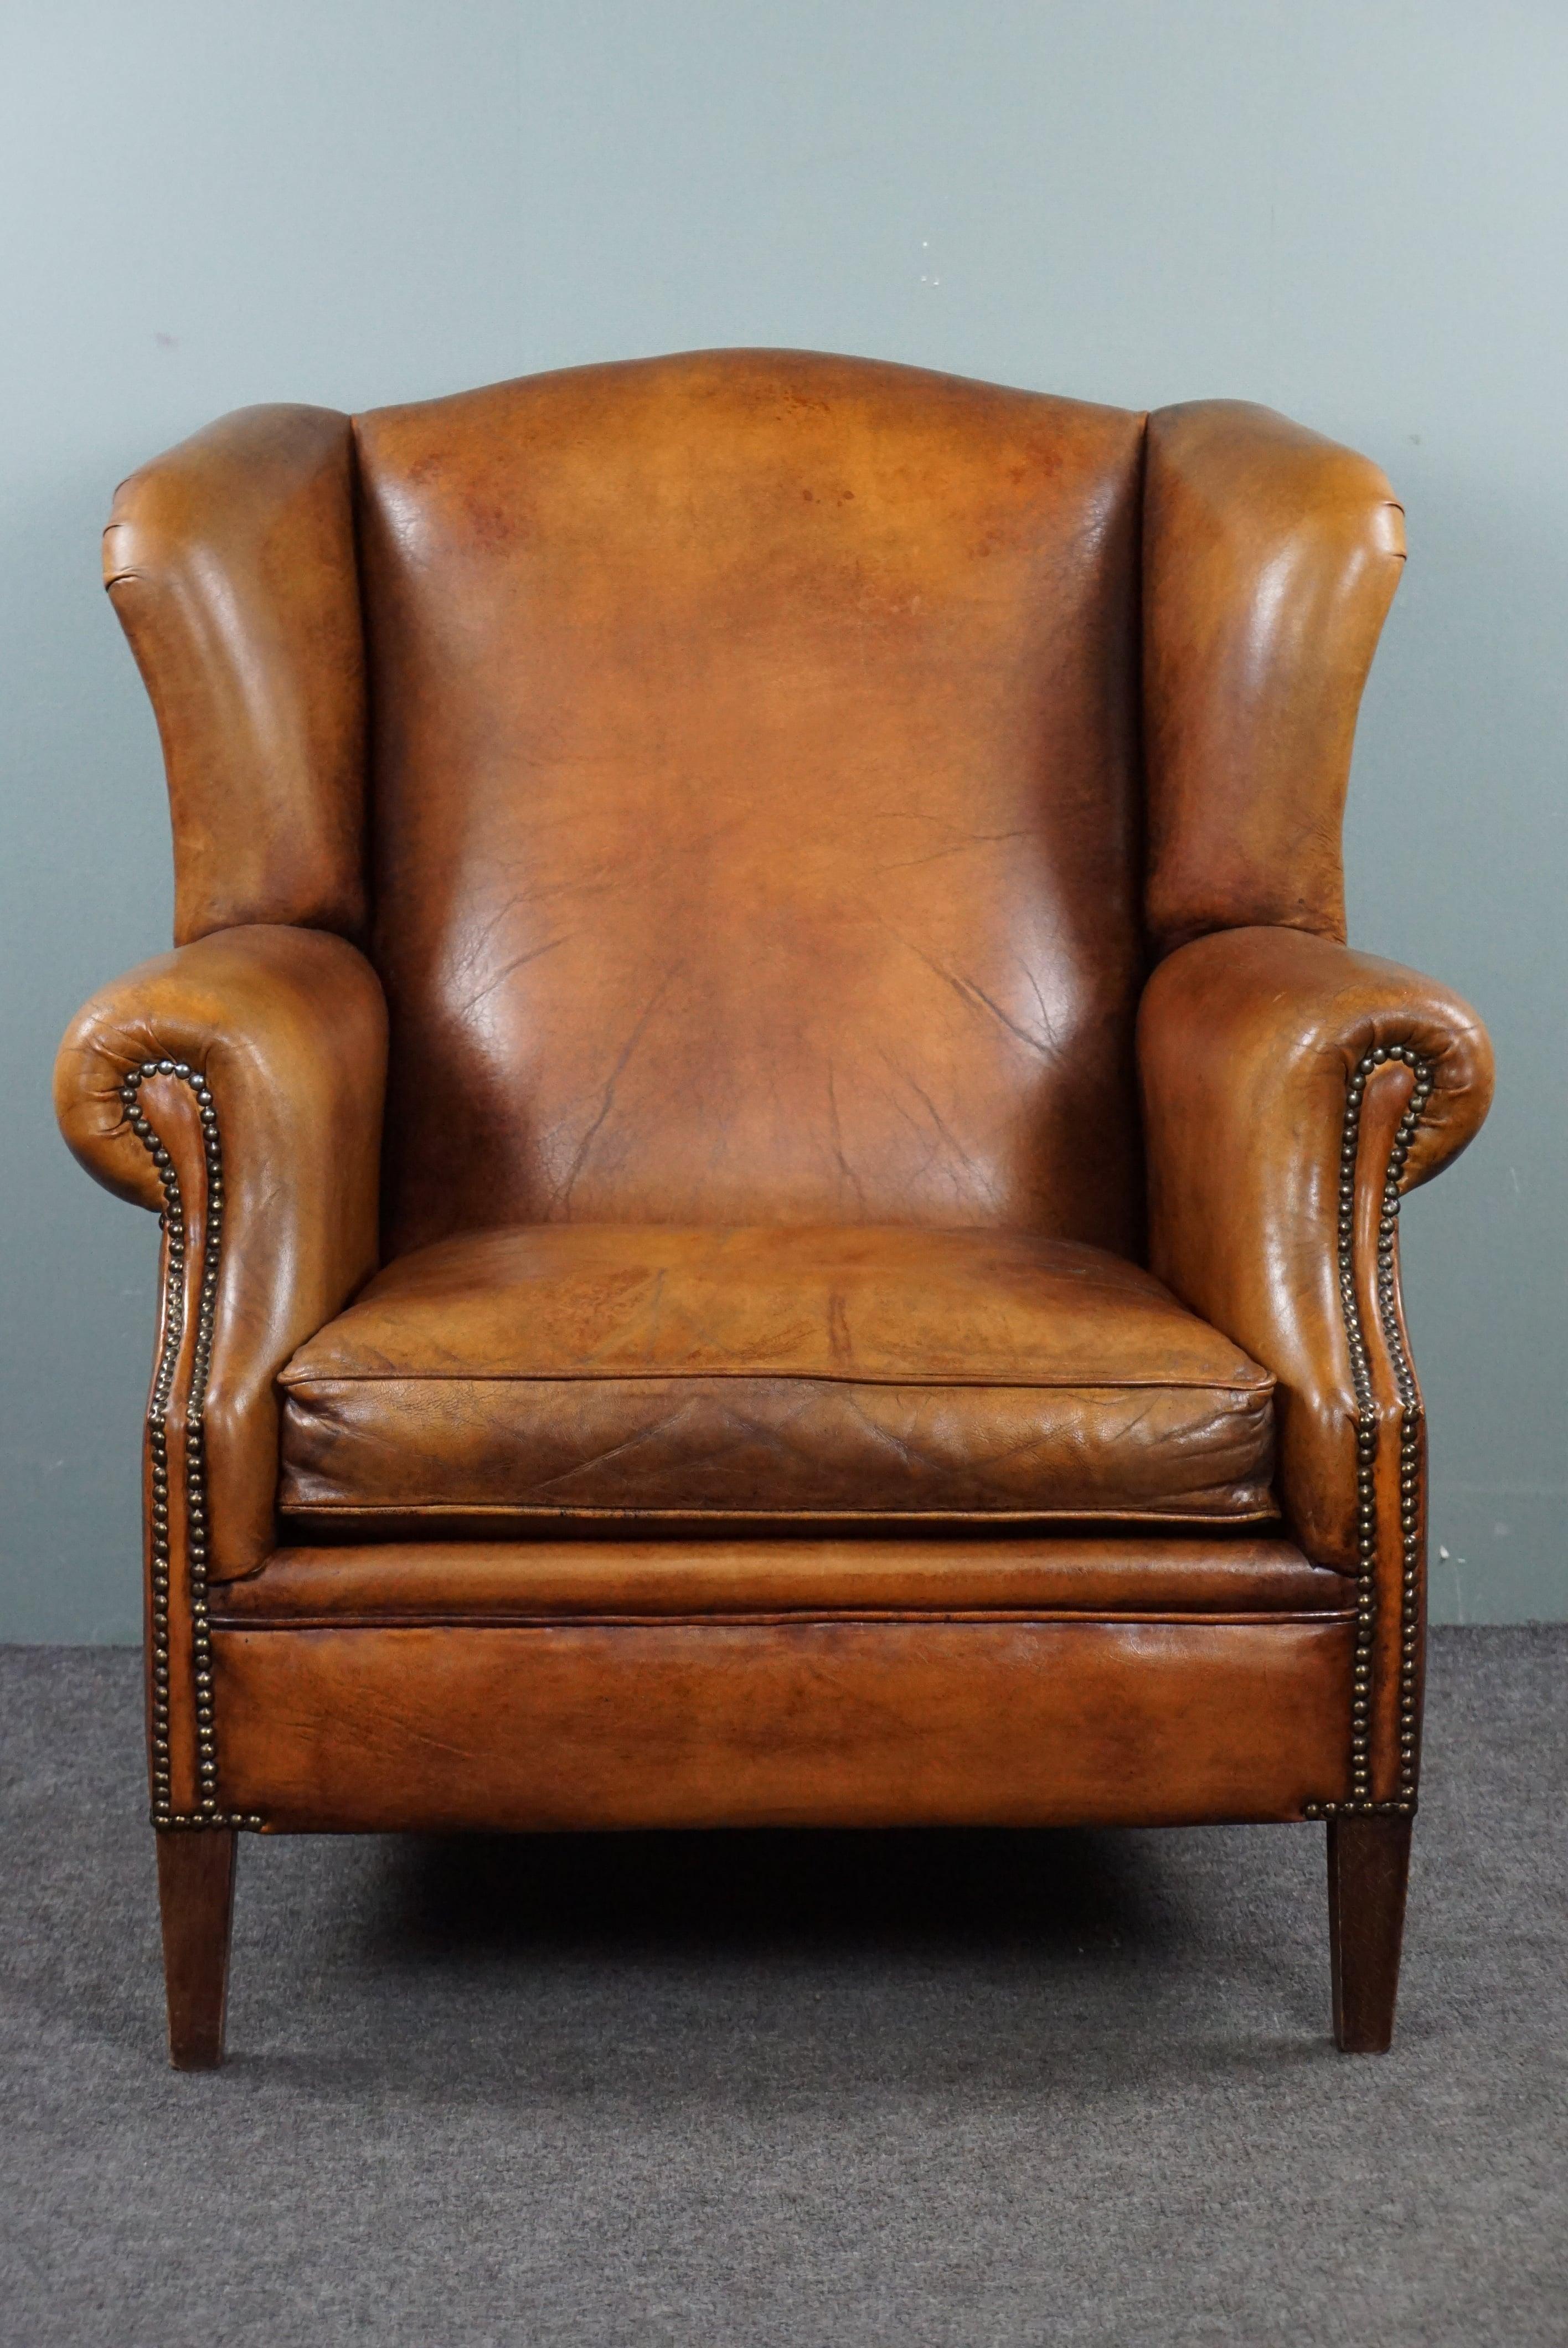 With pride, we present to you this beautifully warm-toned sheep leather wing chair, adorned with decorative nails all around, giving this wing chair both a timeless and sophisticated look.

The distinctive design enhances the beauty of the exquisite